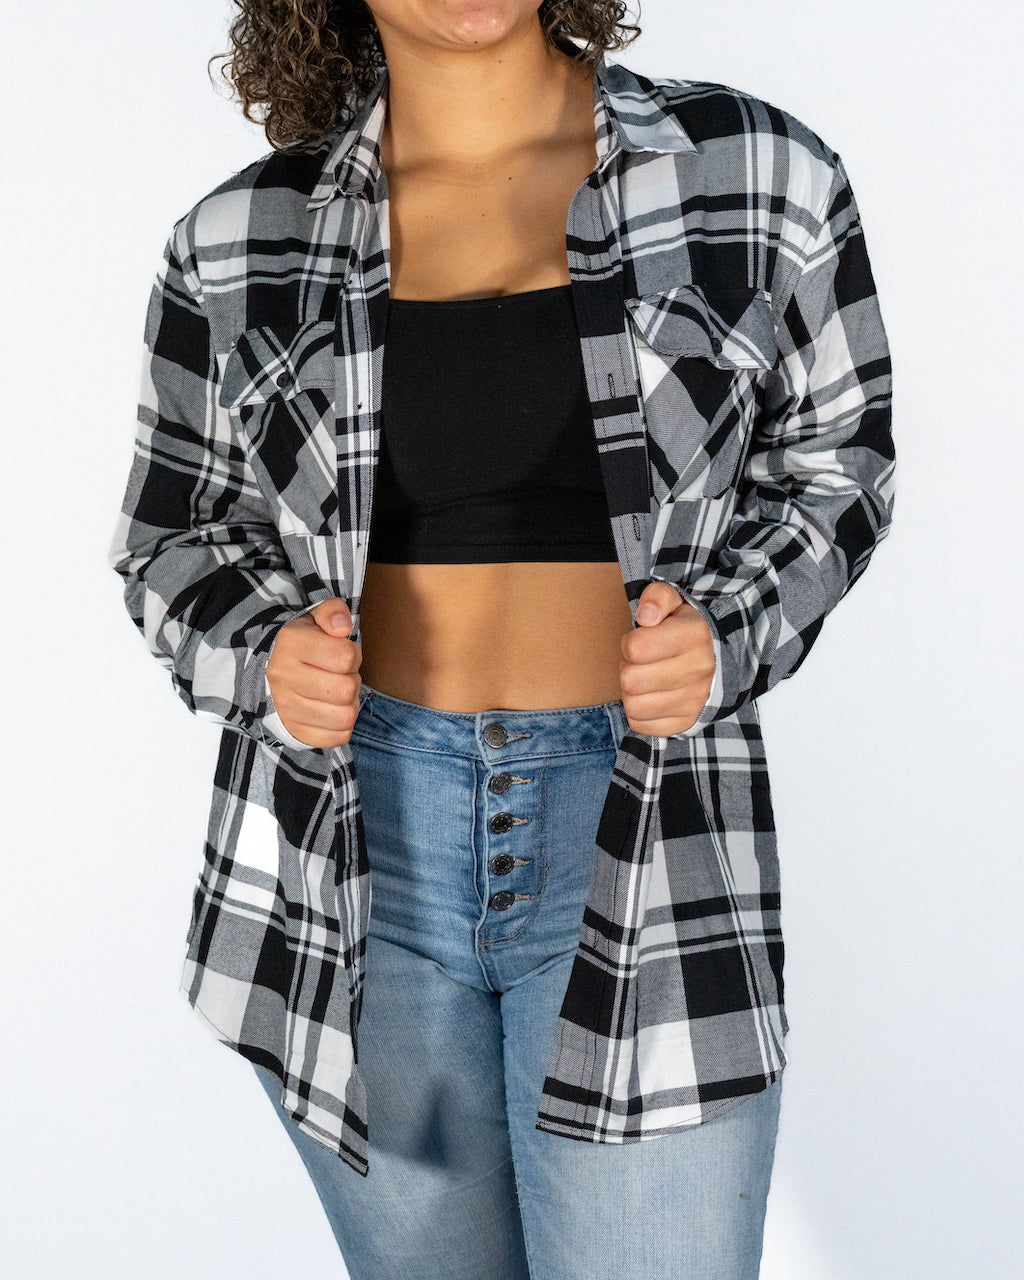 Black/White Flannel with Rebel Star